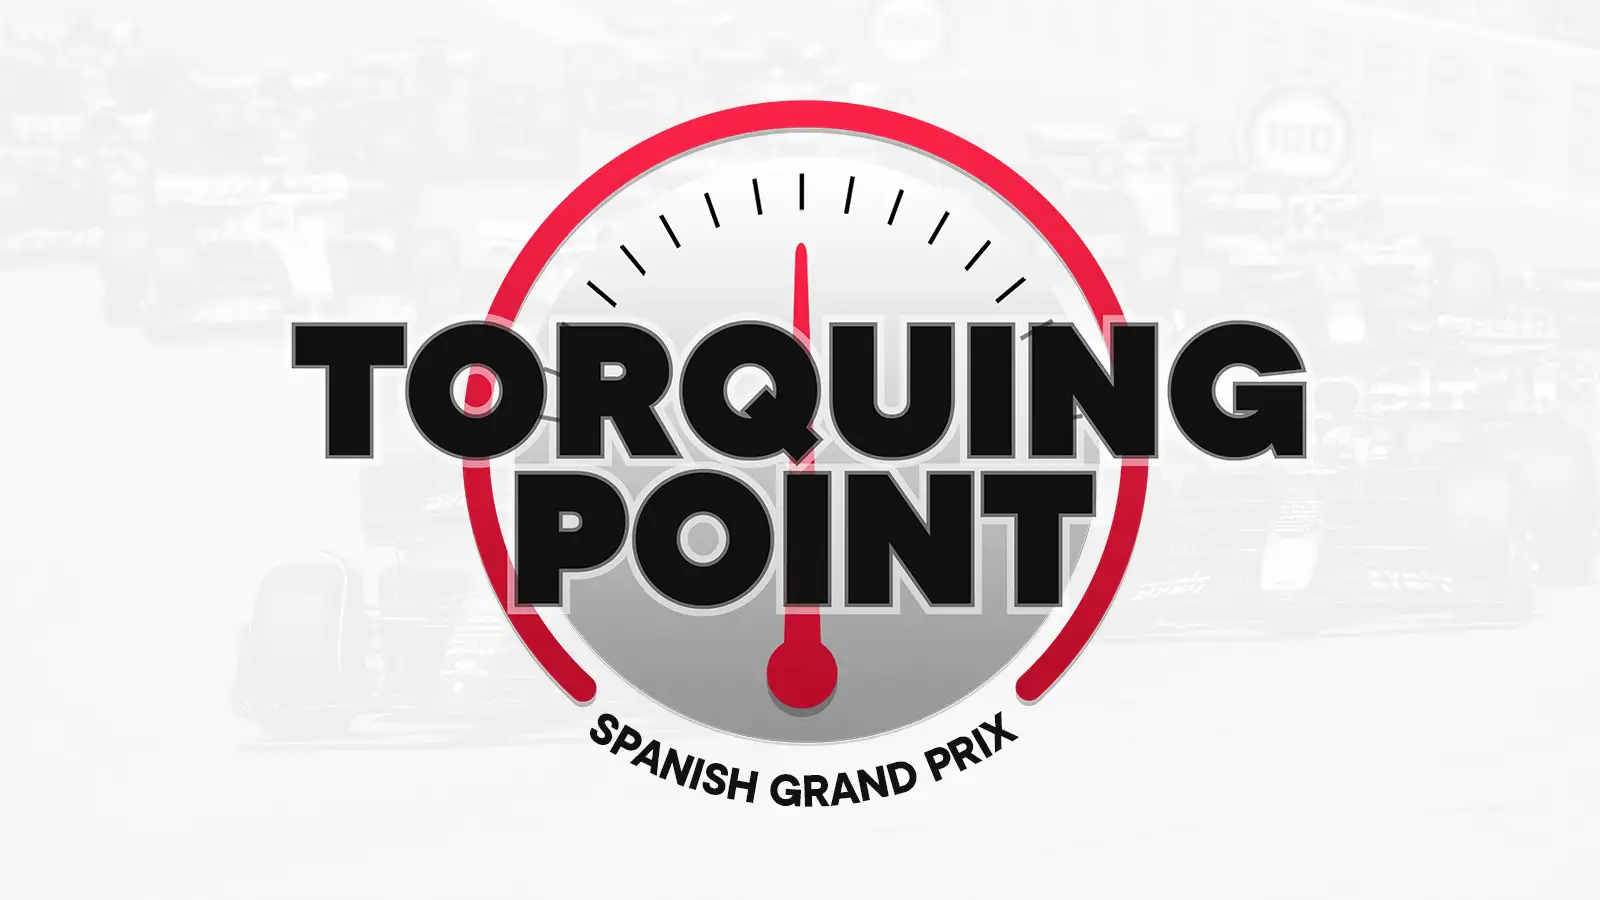 Torquing Point podcast on the Spanish Grand Prix.